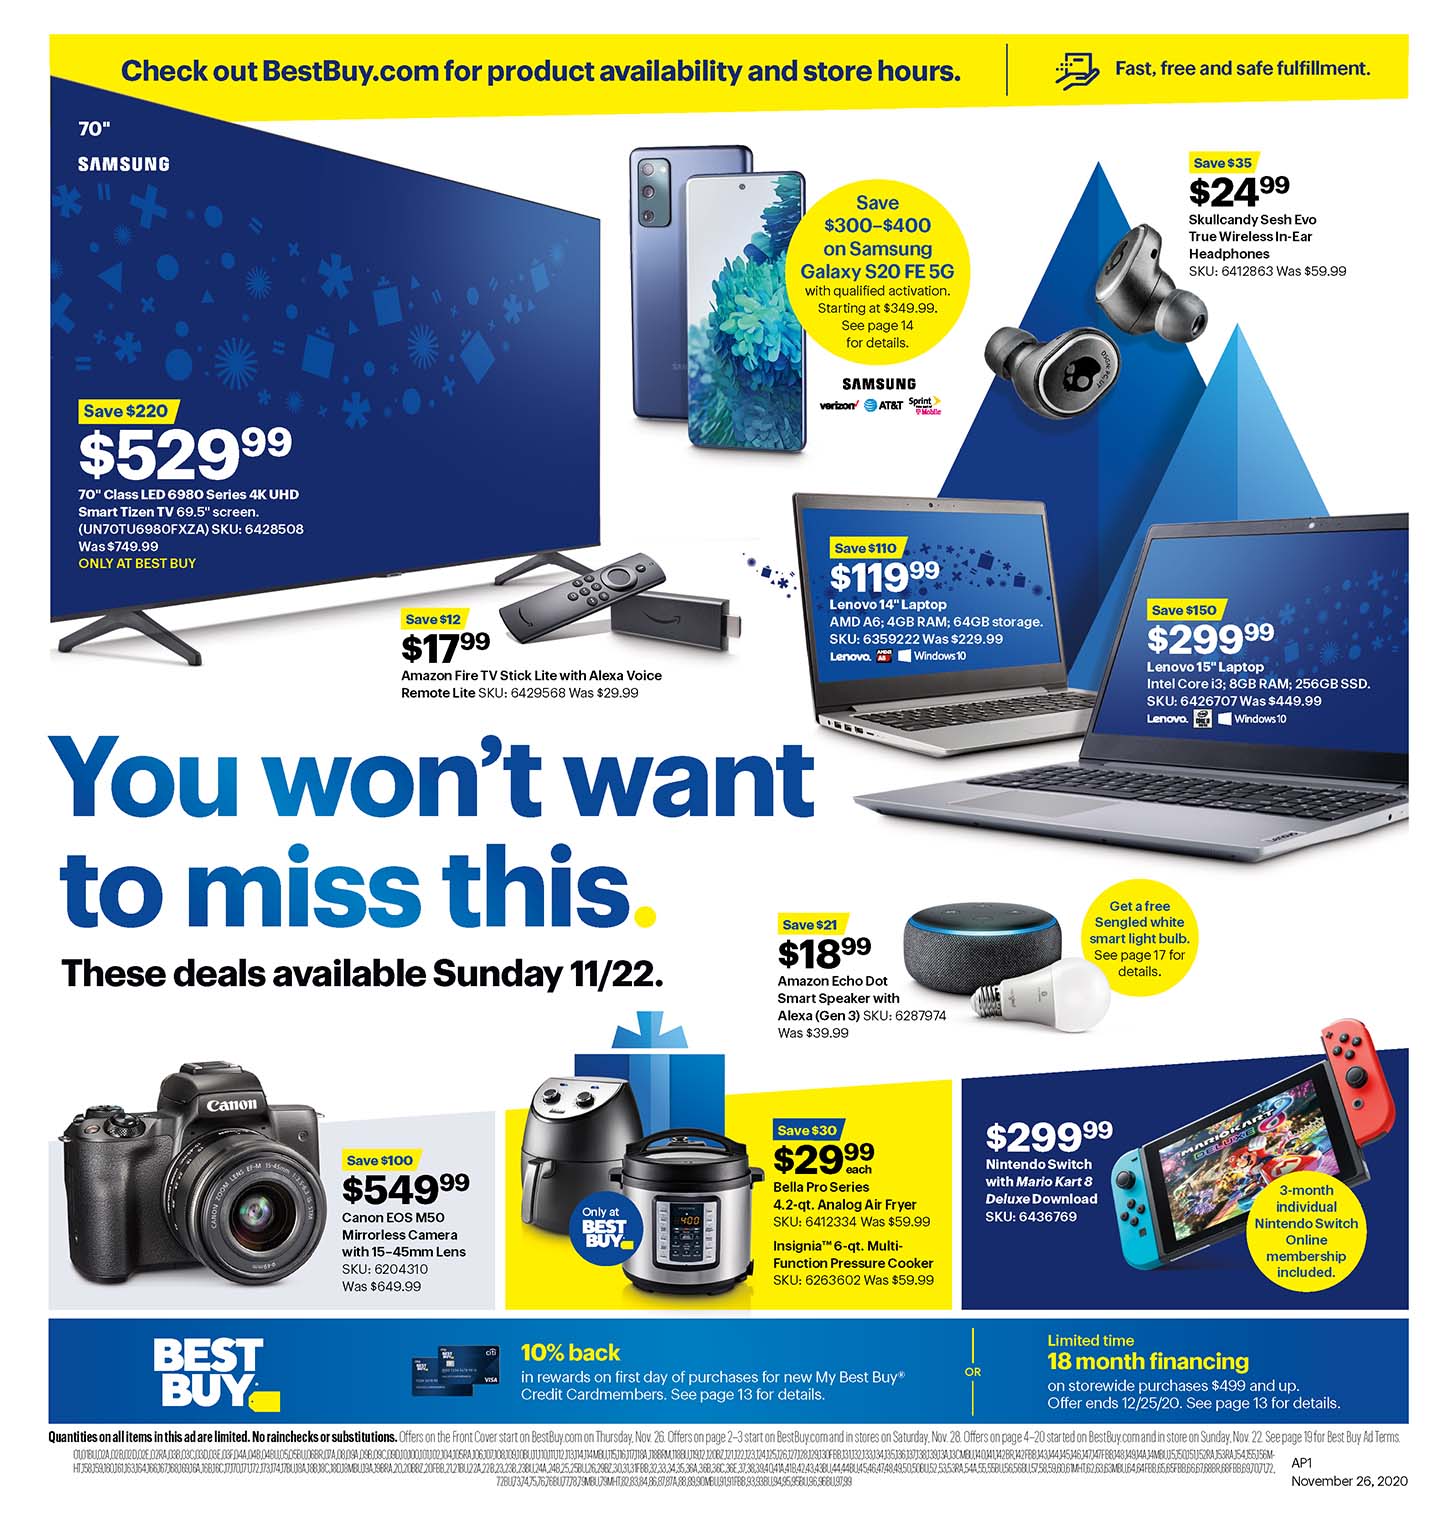 Best Buy Black Friday Ad 2020 - When Are Bestbuy Black Friday Deals Over